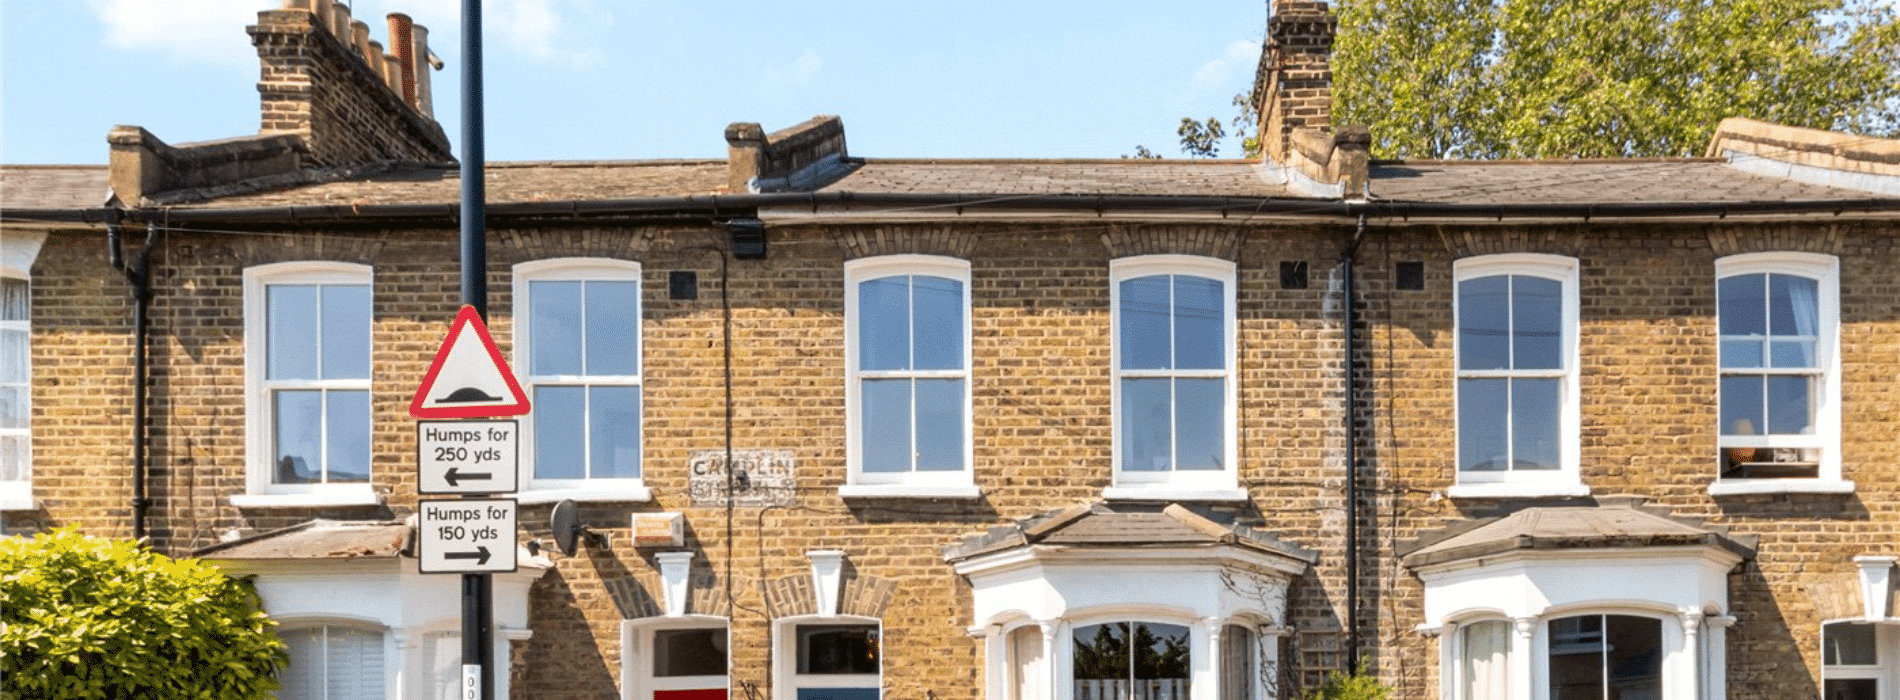 Vintage houses in New Cross Gate, SE14 showcasing original pine floorboards and unique architectural details, preserving the historical charm of the area.